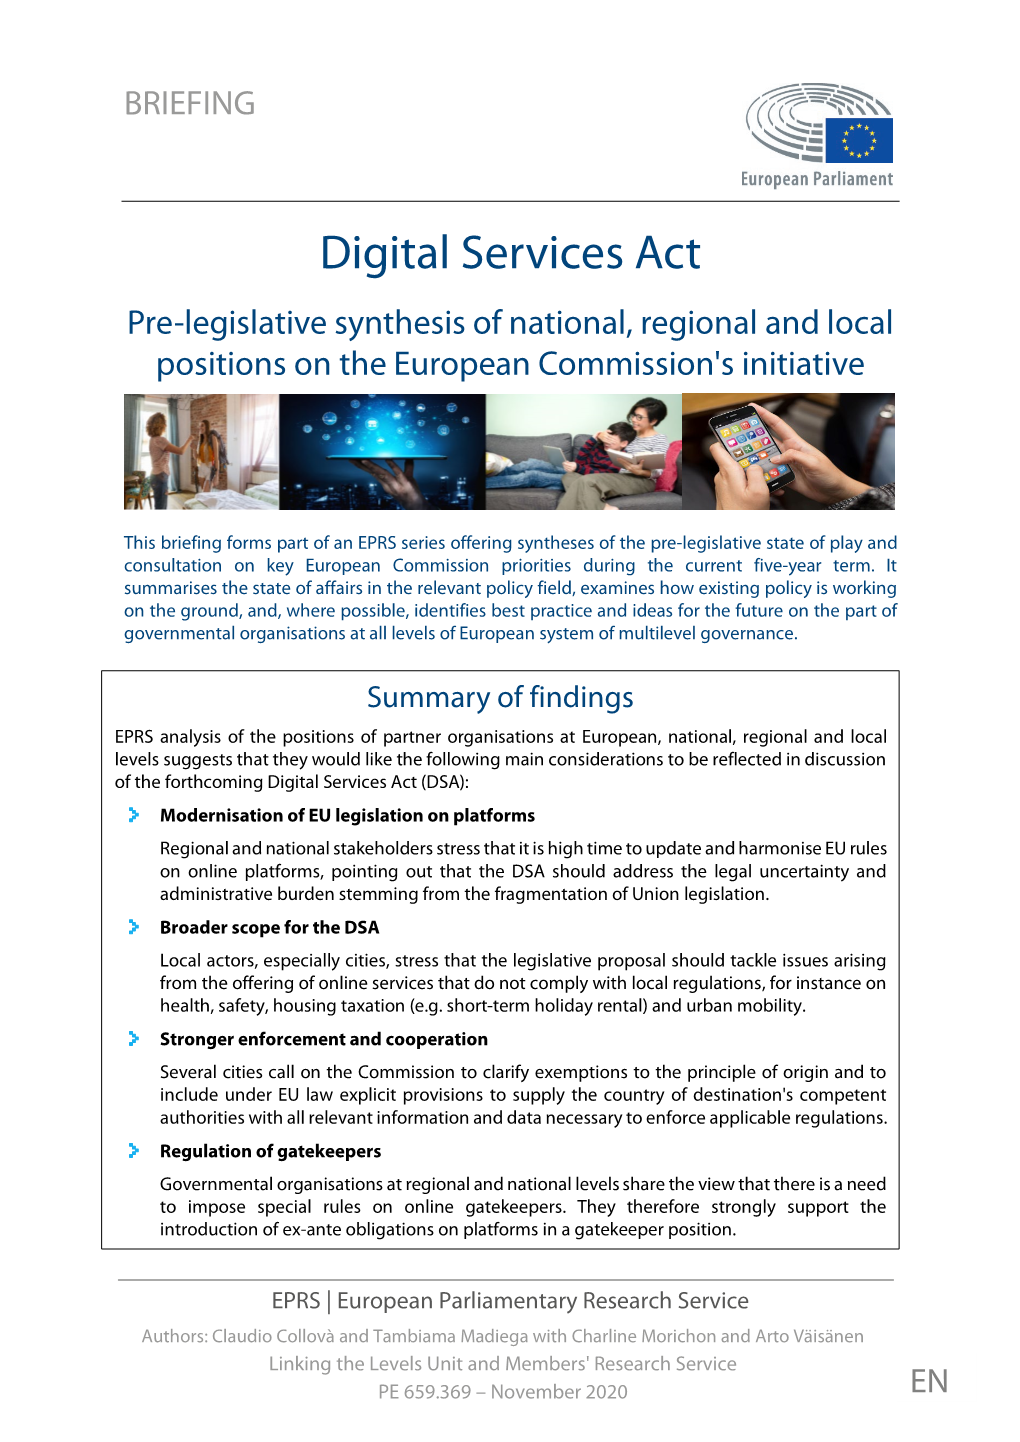 Digital Services Act Pre-Legislative Synthesis of National, Regional and Local Positions on the European Commission's Initiative